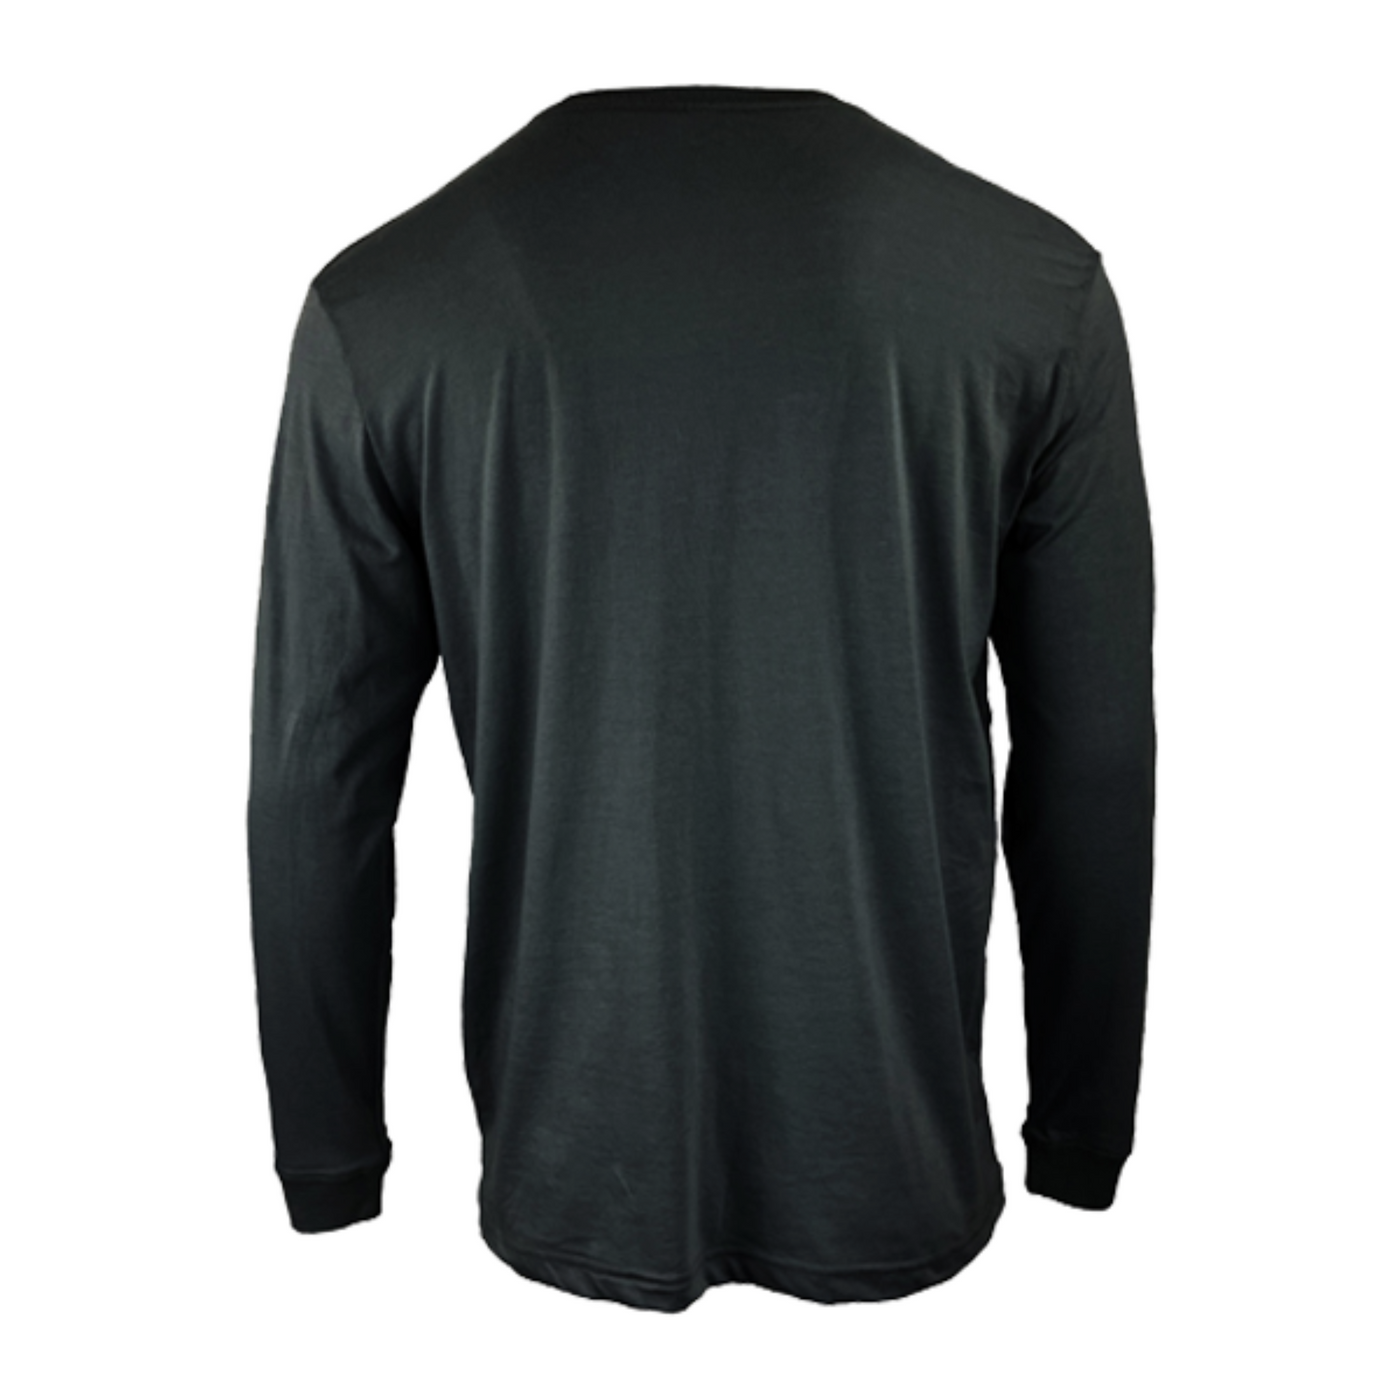 THE 615 HOUSE - Logo Long Sleeve: Solid Black